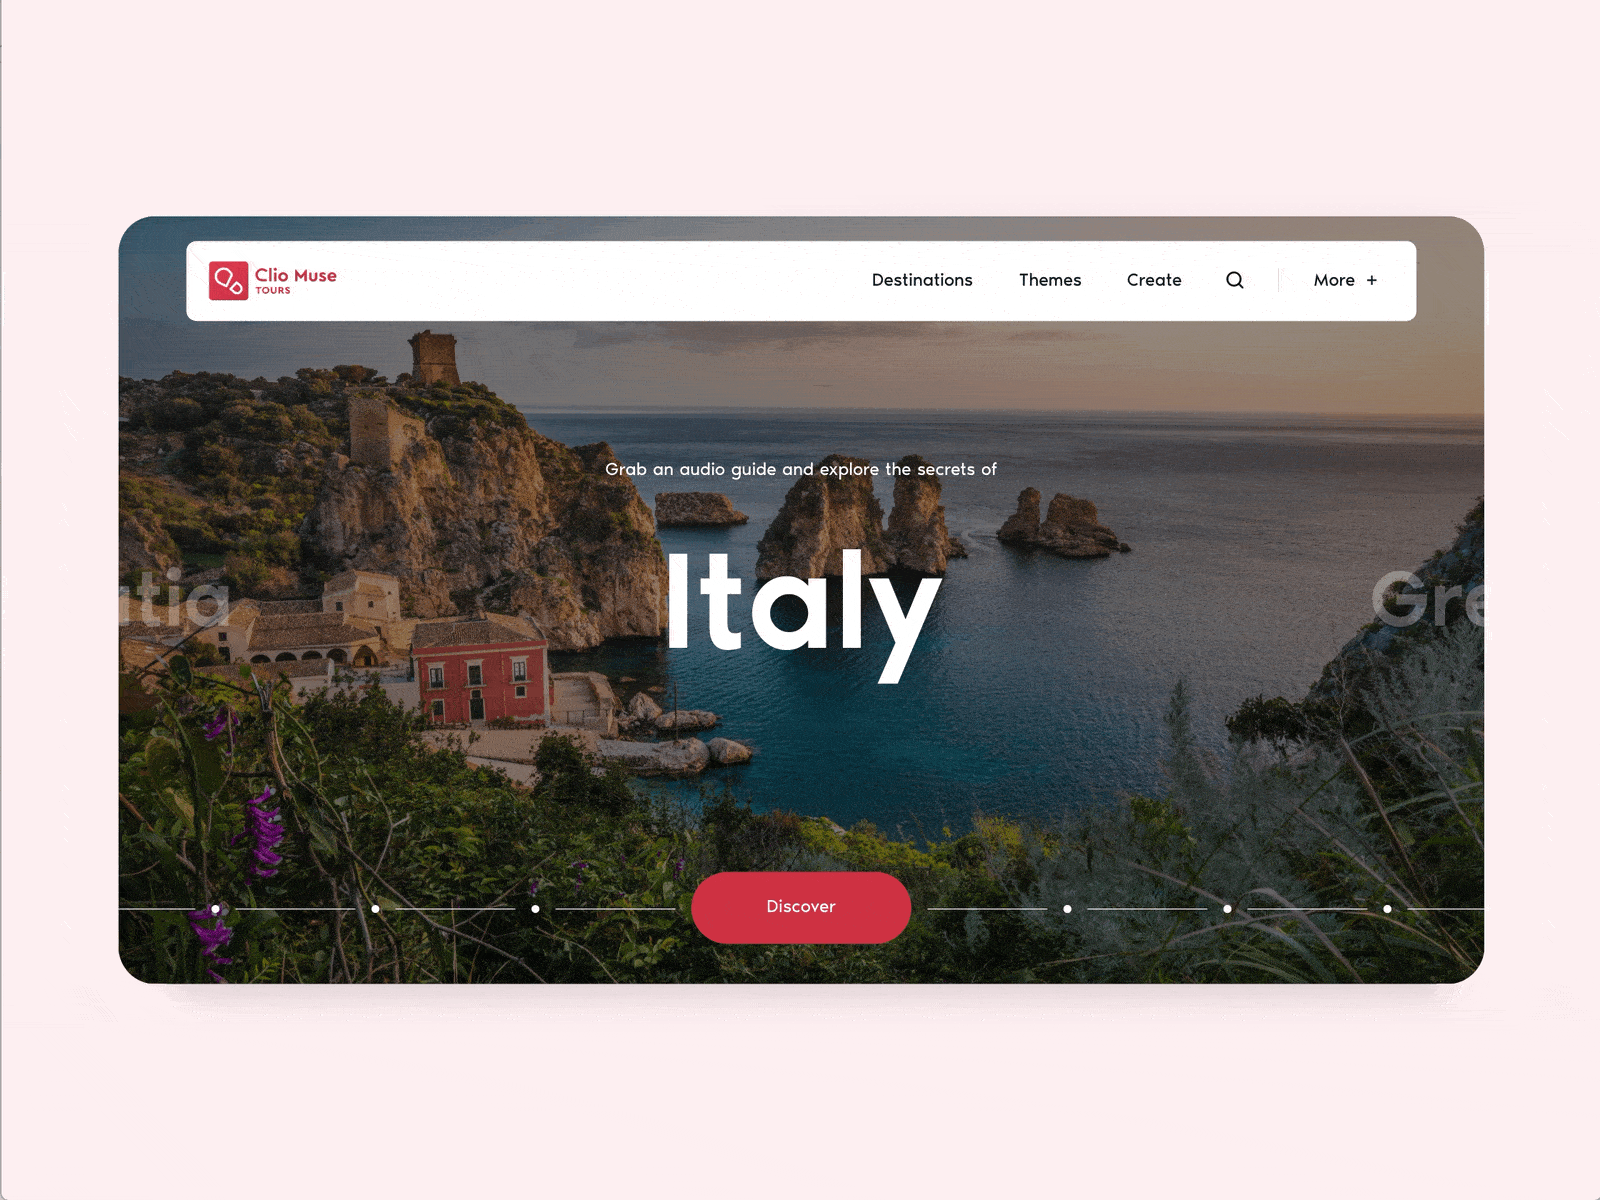 Countries carousel - Clio Muse Tours redesign concept